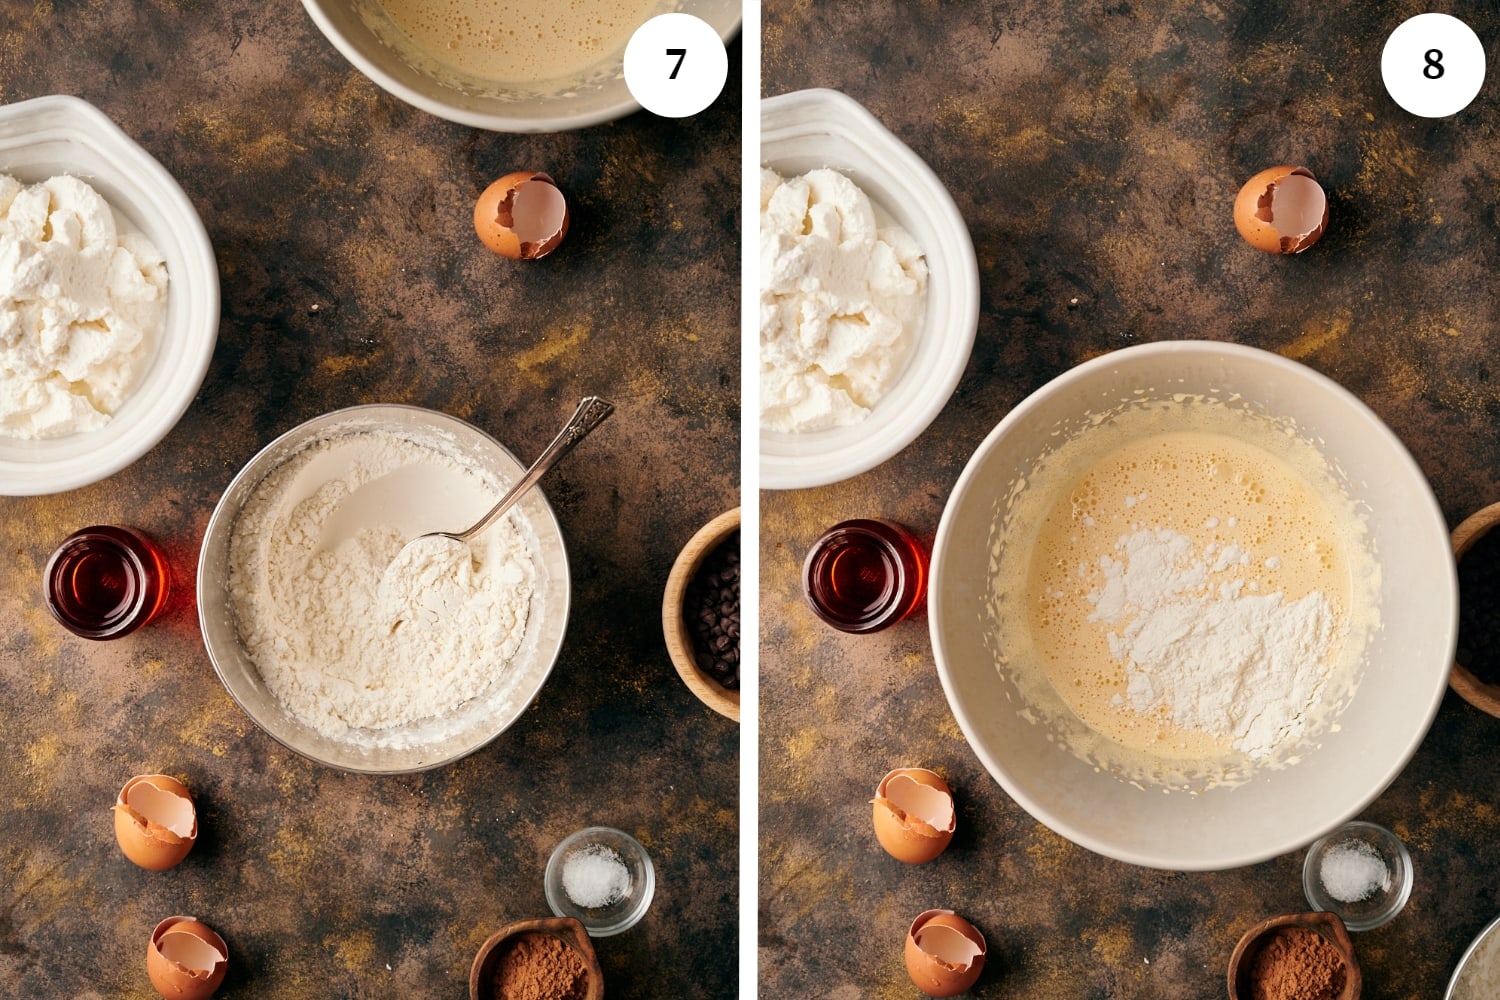 zuccotto procedure: flour mixture in a bowl with a spoon. second photo is a batter in a bowl with some flour on top.